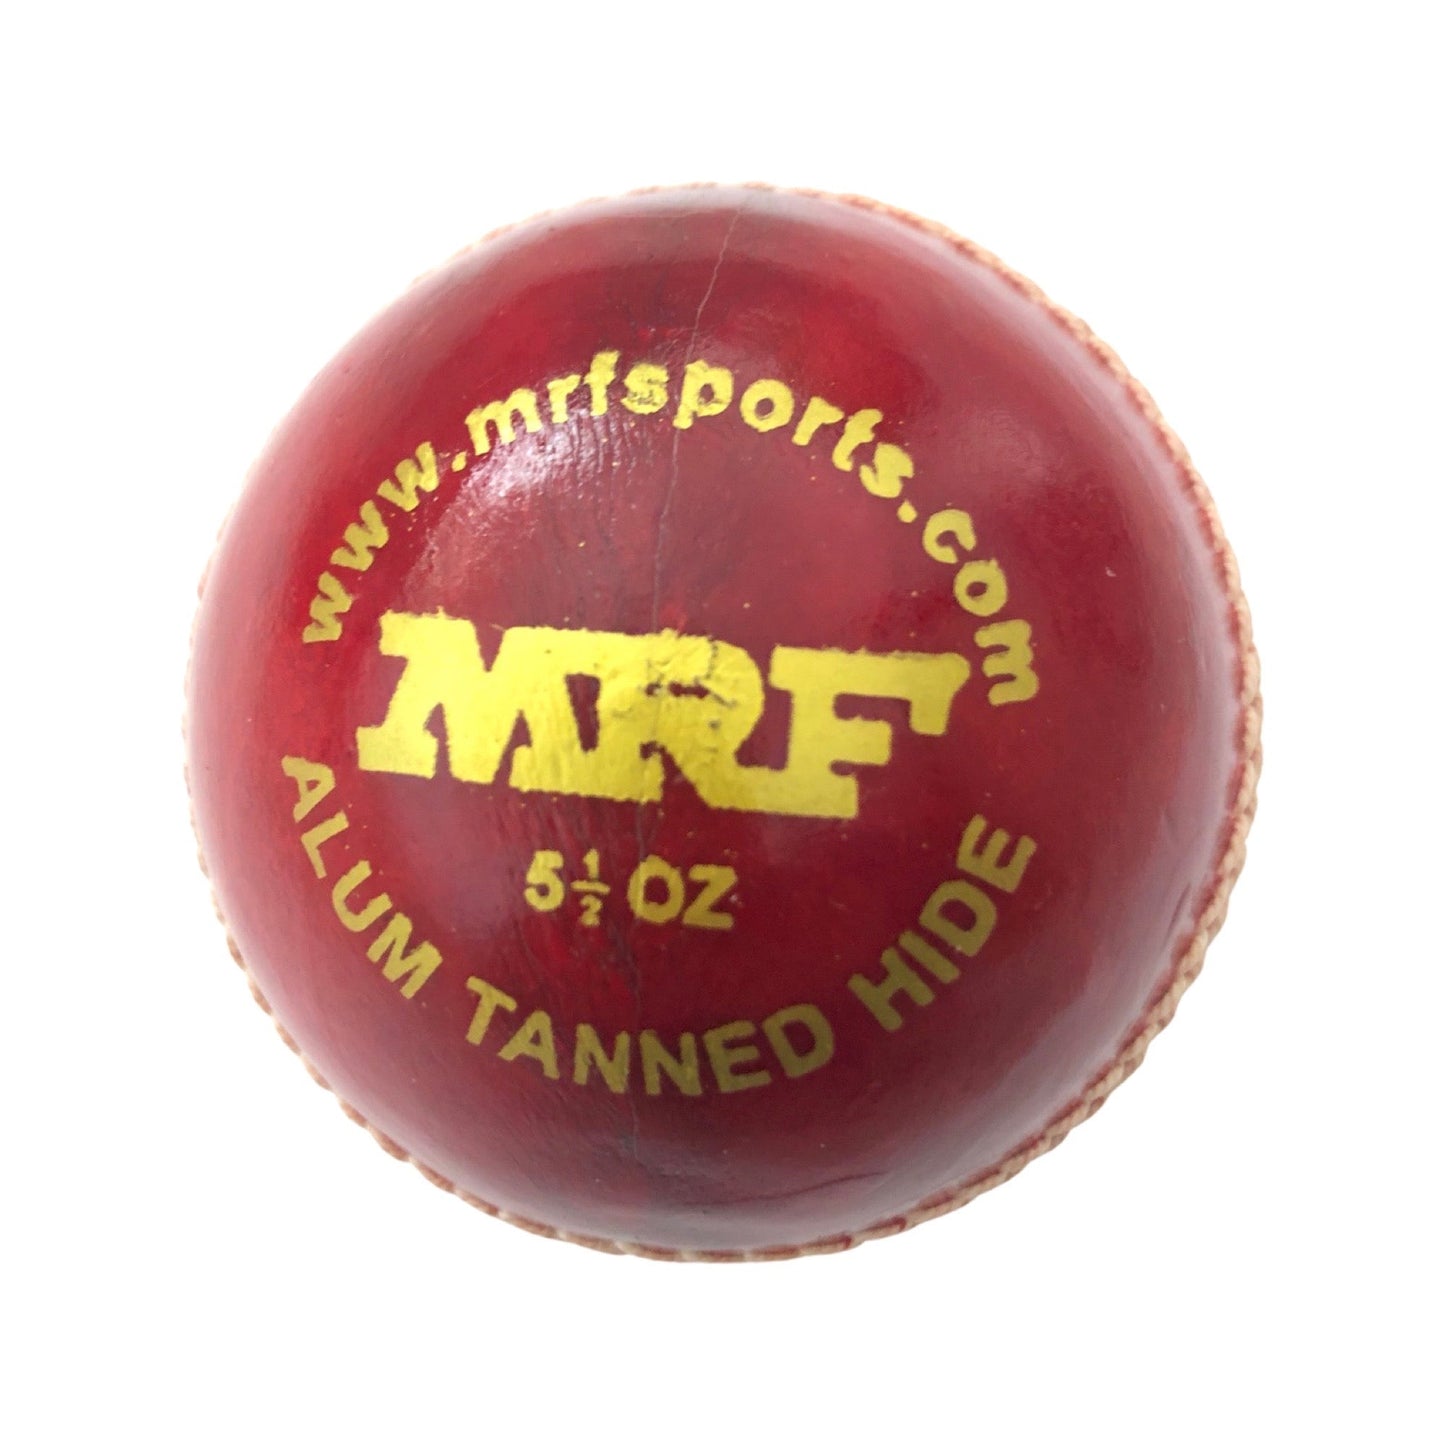 MRF Club Cricket Ball - Red (Pack of 3)